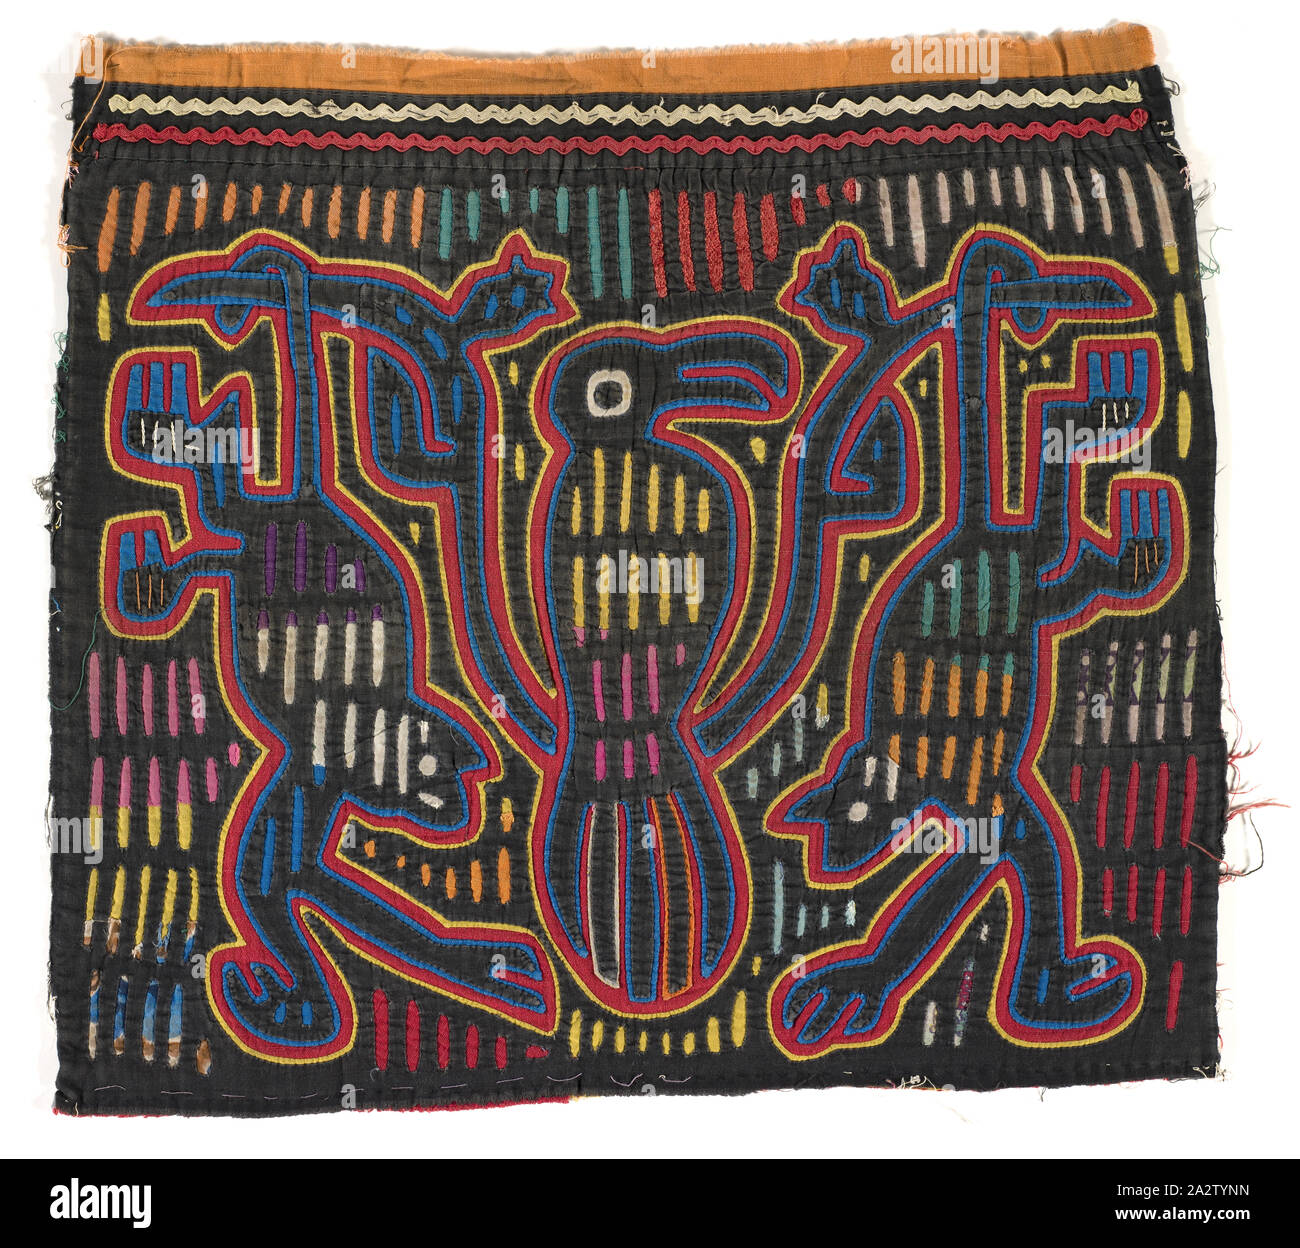 shirt panel (mola), Kuna people, about 1950s, appliqued cotton, 18-3/16 x 19-13/16 in., Textile and Fashion Arts Stock Photo